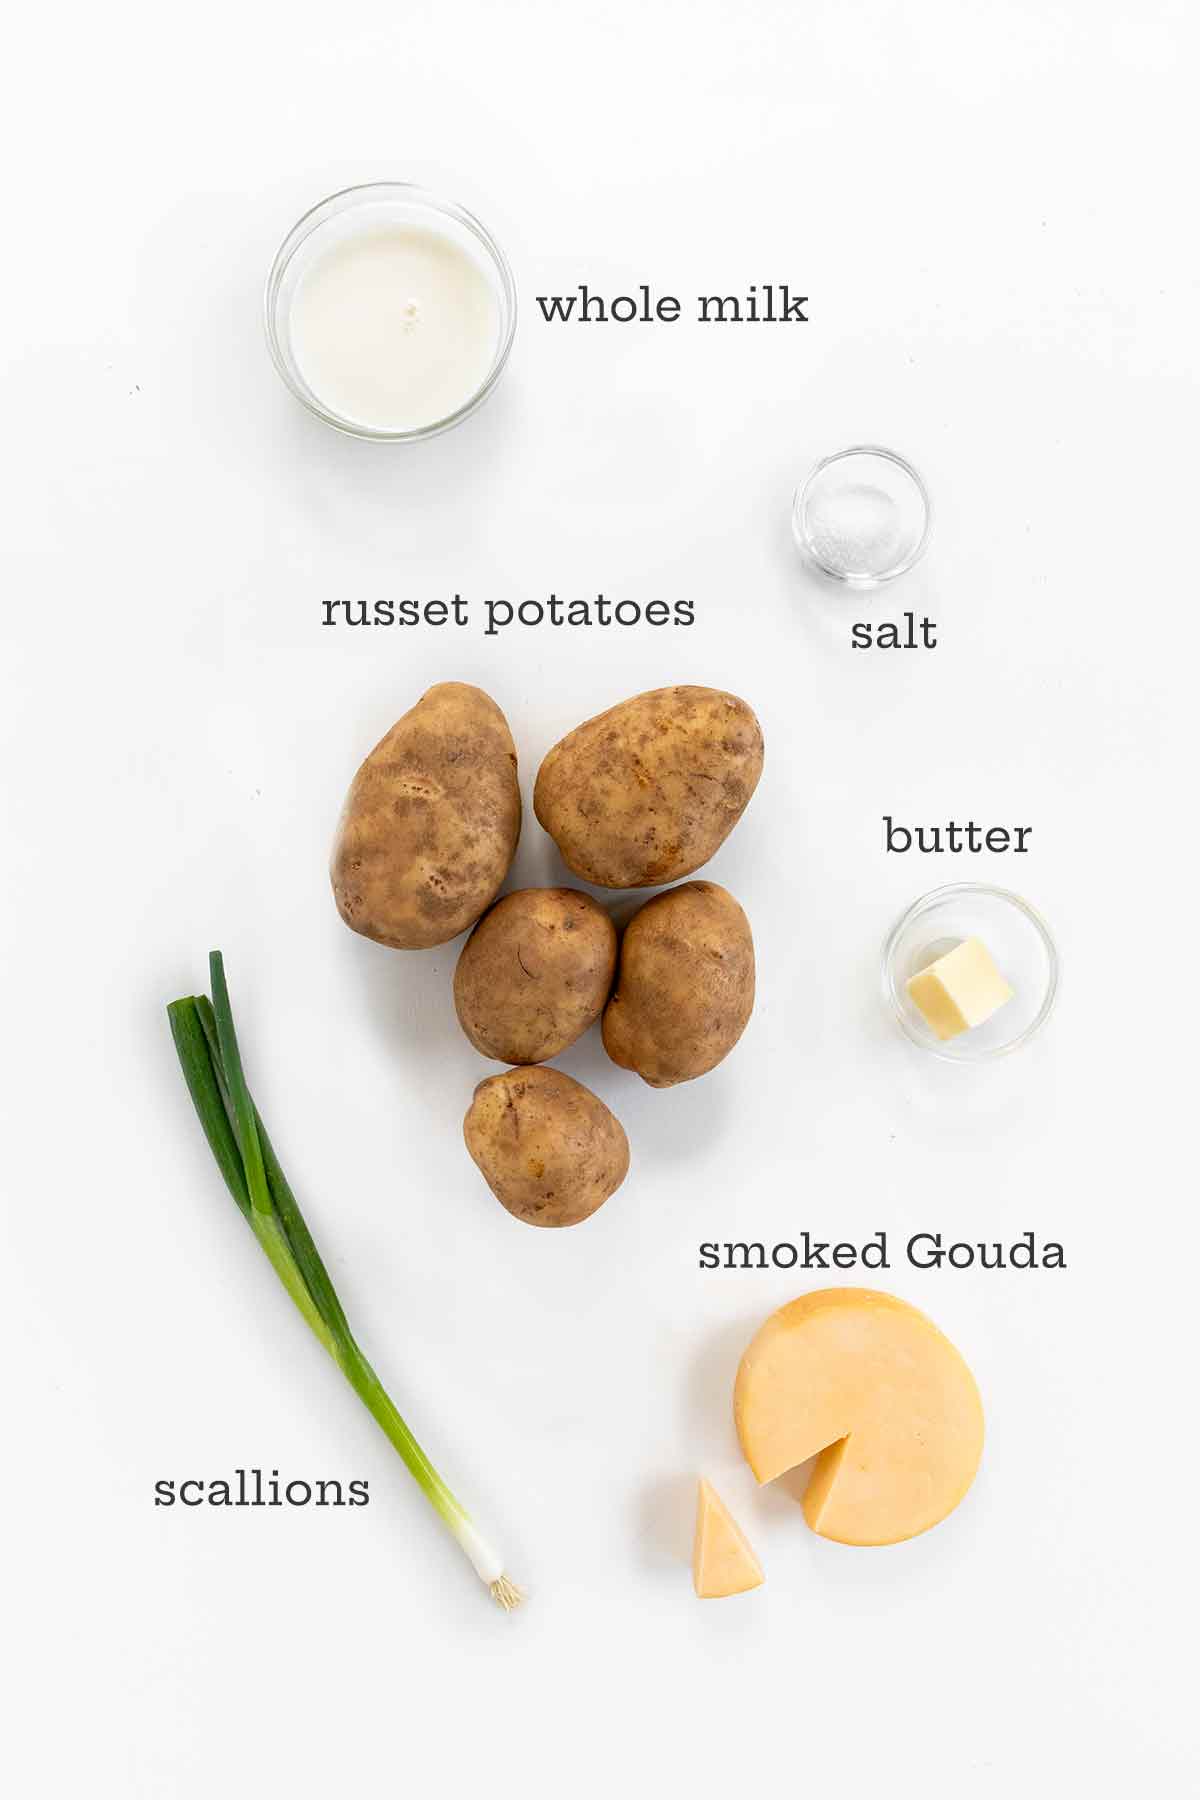 Ingredients for cheesy mashed potatoes--milk, russet potatoes, scallions, butter, salt, and smoked Gouda.